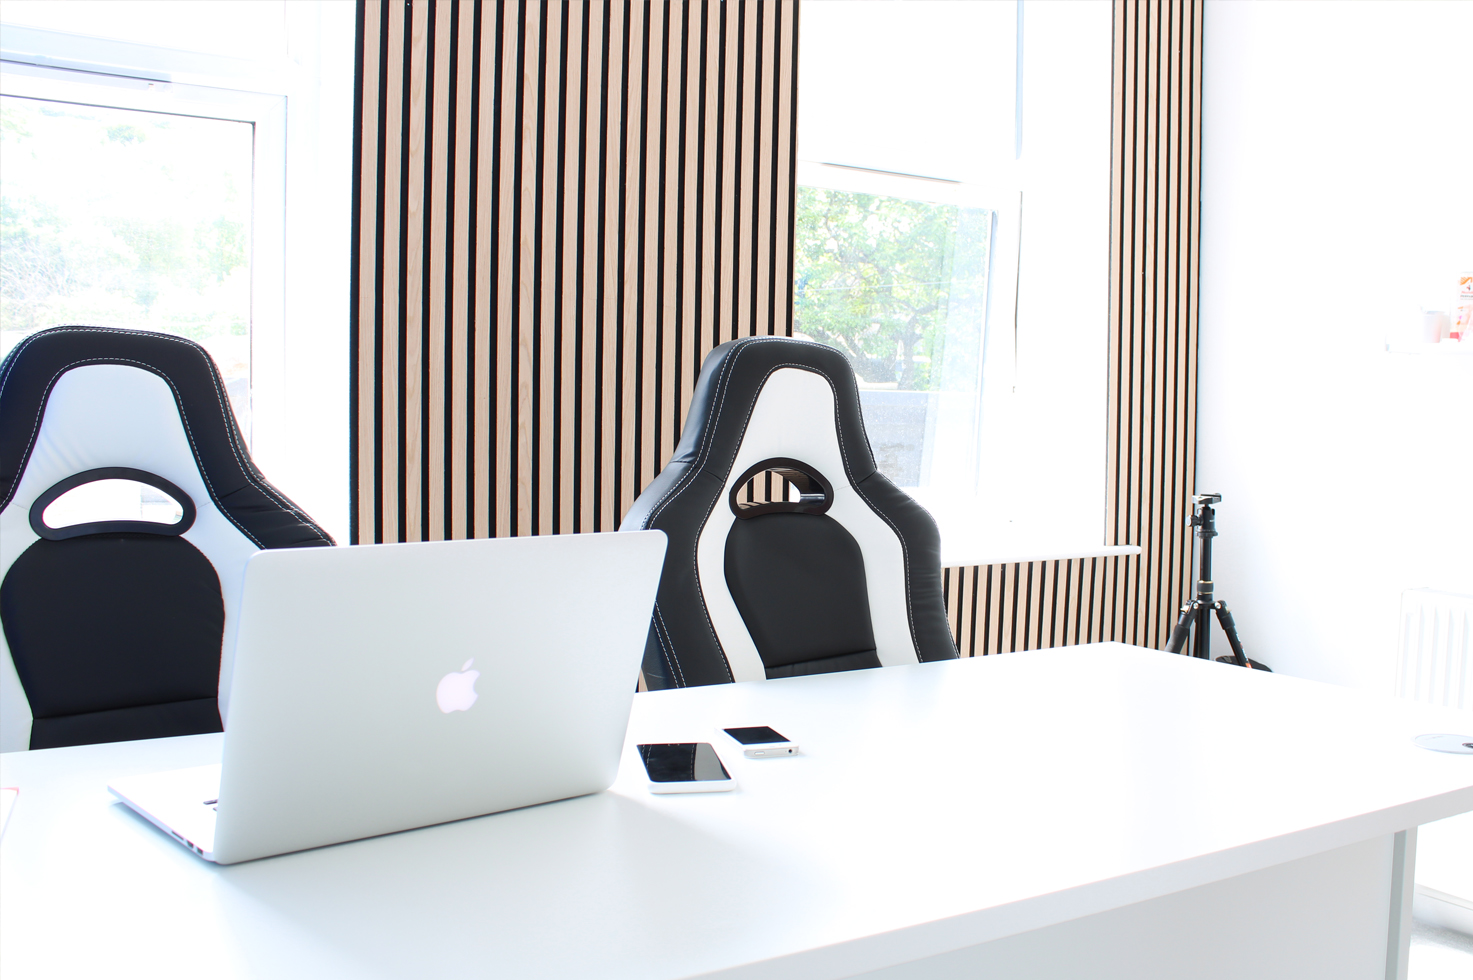 Our laptop placed on our white office desk with white accented chairs, whilst also demonstrating our wooden-slatted walls in the background.